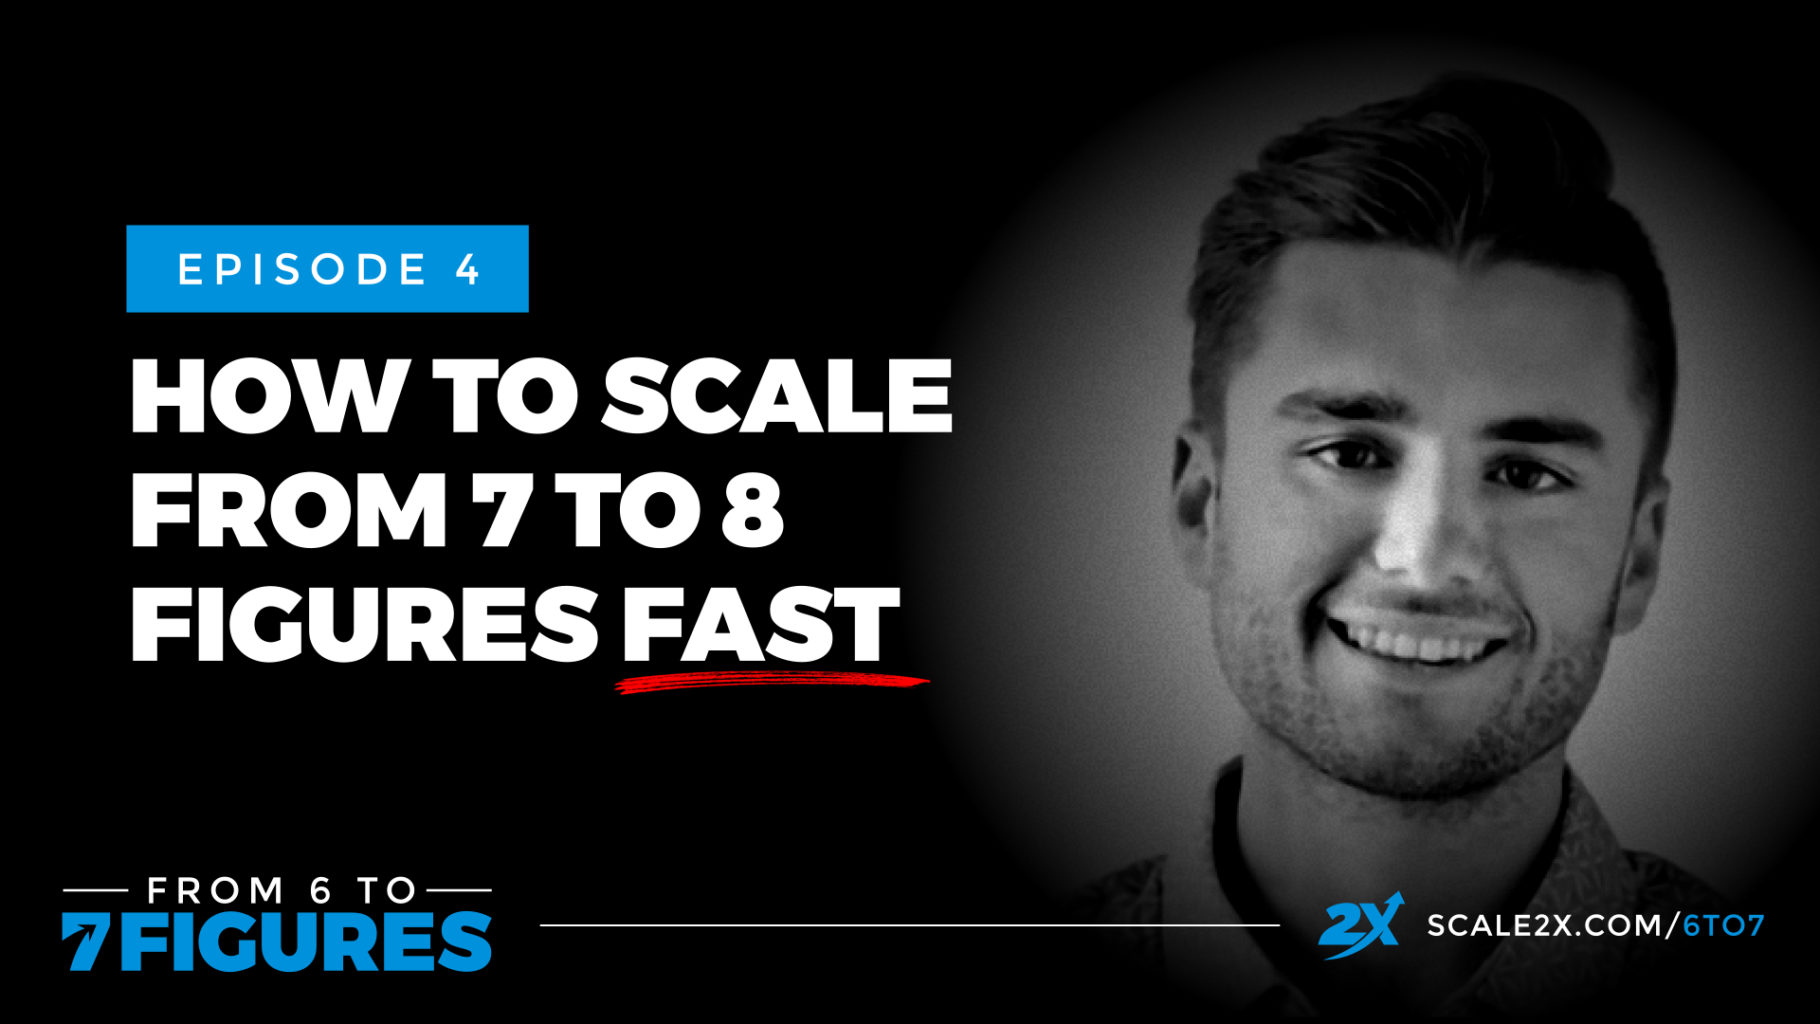 Episode 04: How to Scale From 7 to 8 Figures FAST